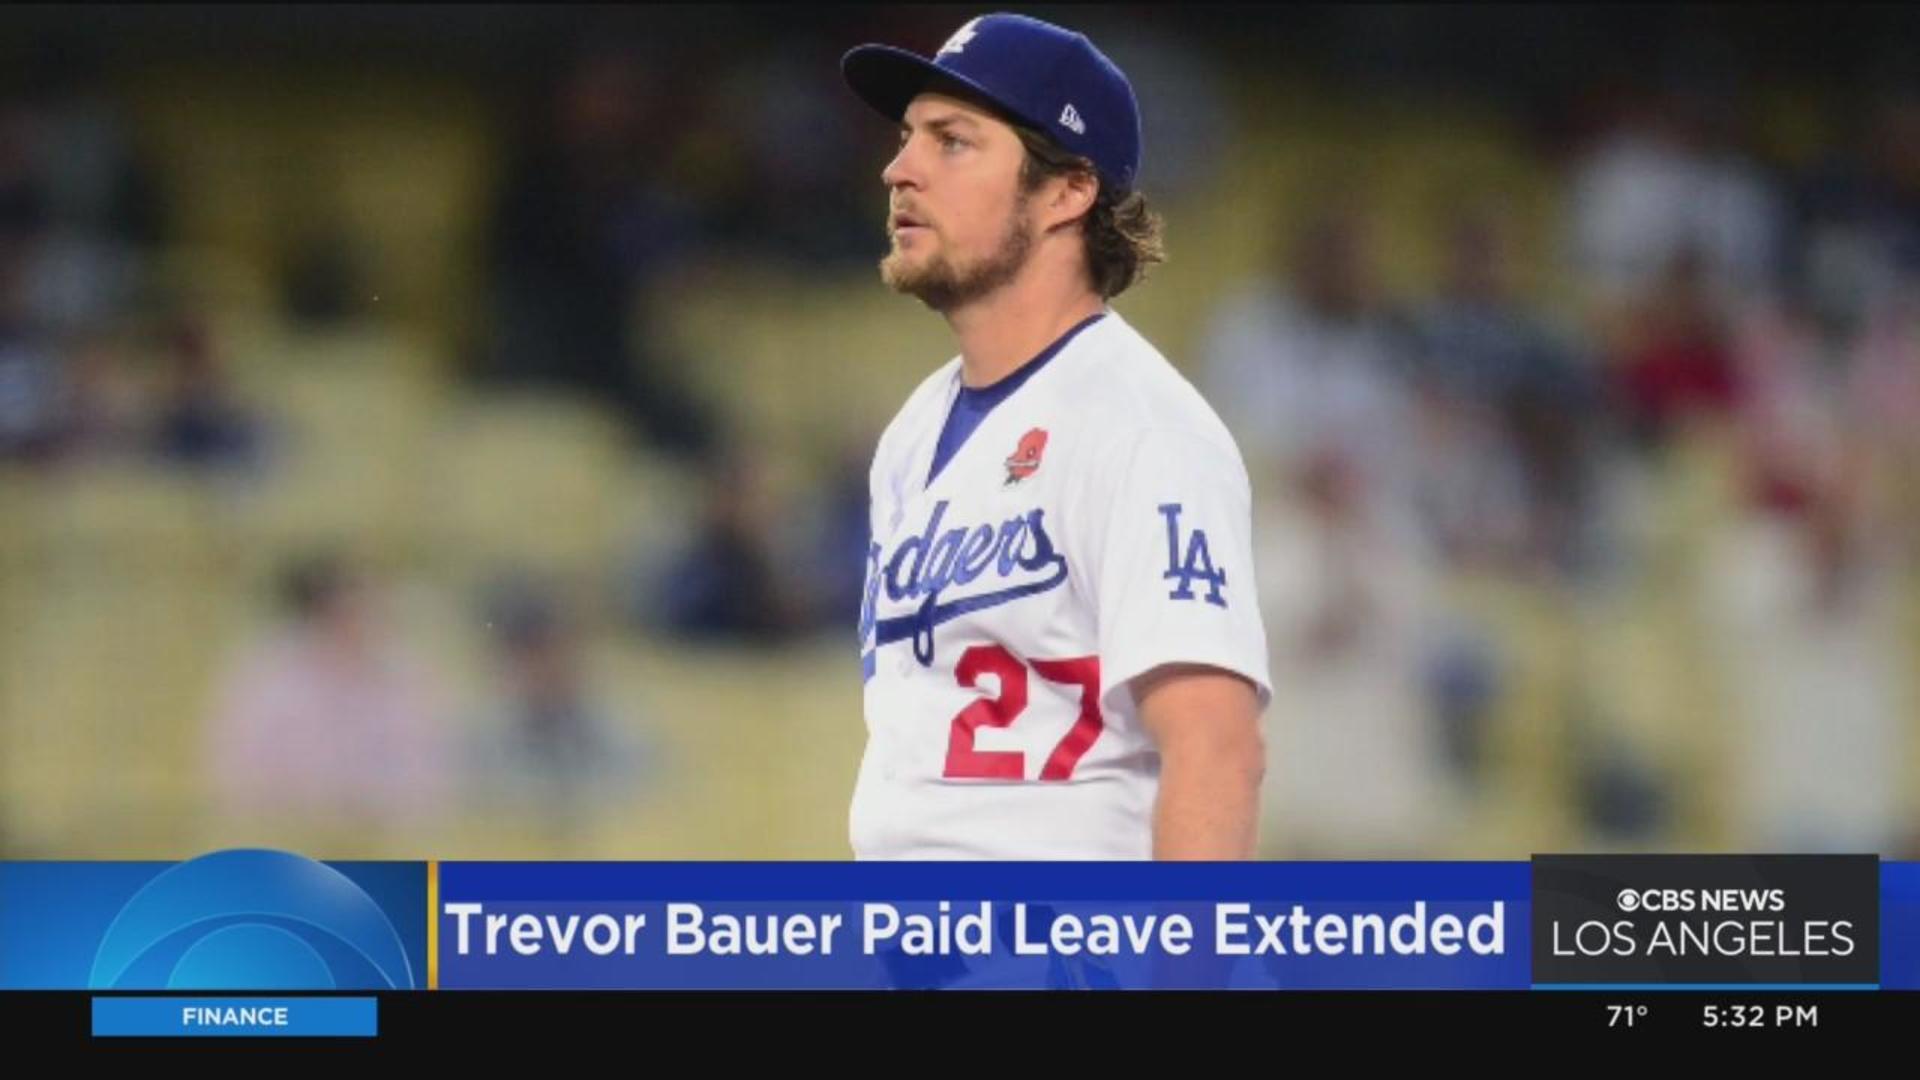 Trevor Bauer paid leave extended through July 27 by MLB